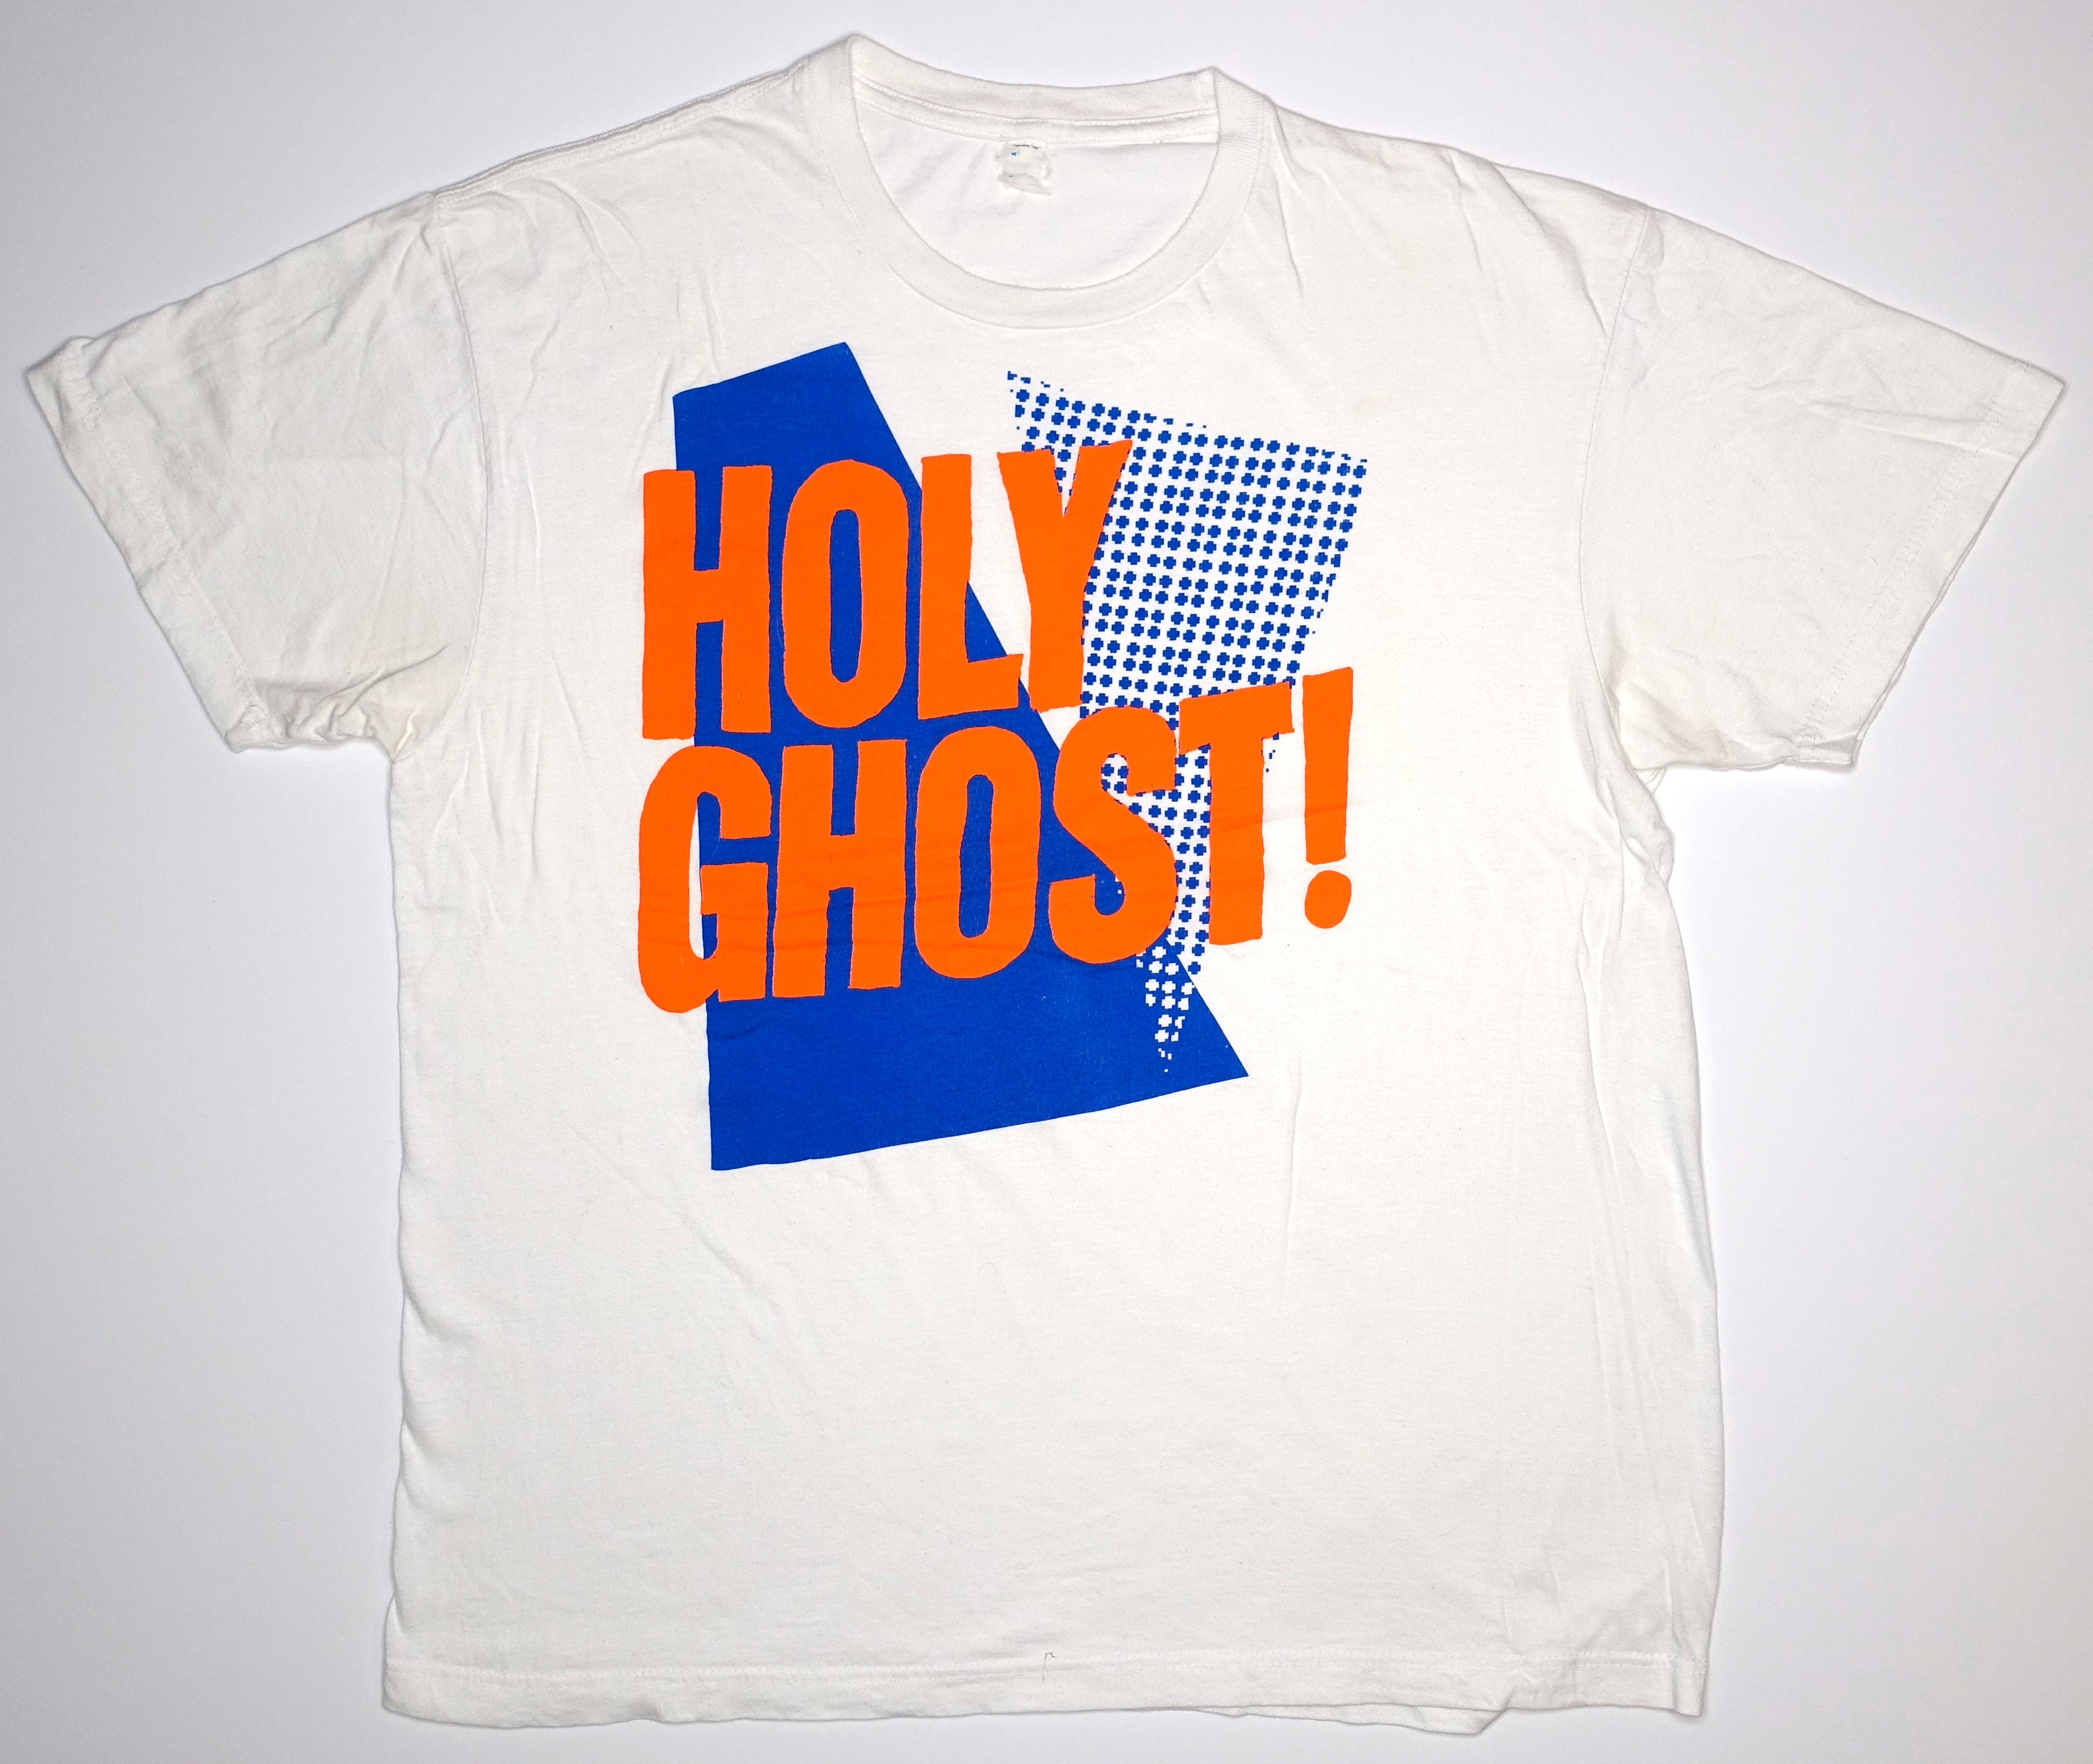 Holy Ghost! ‎– S/T 2011 Tour Shirt Size Large